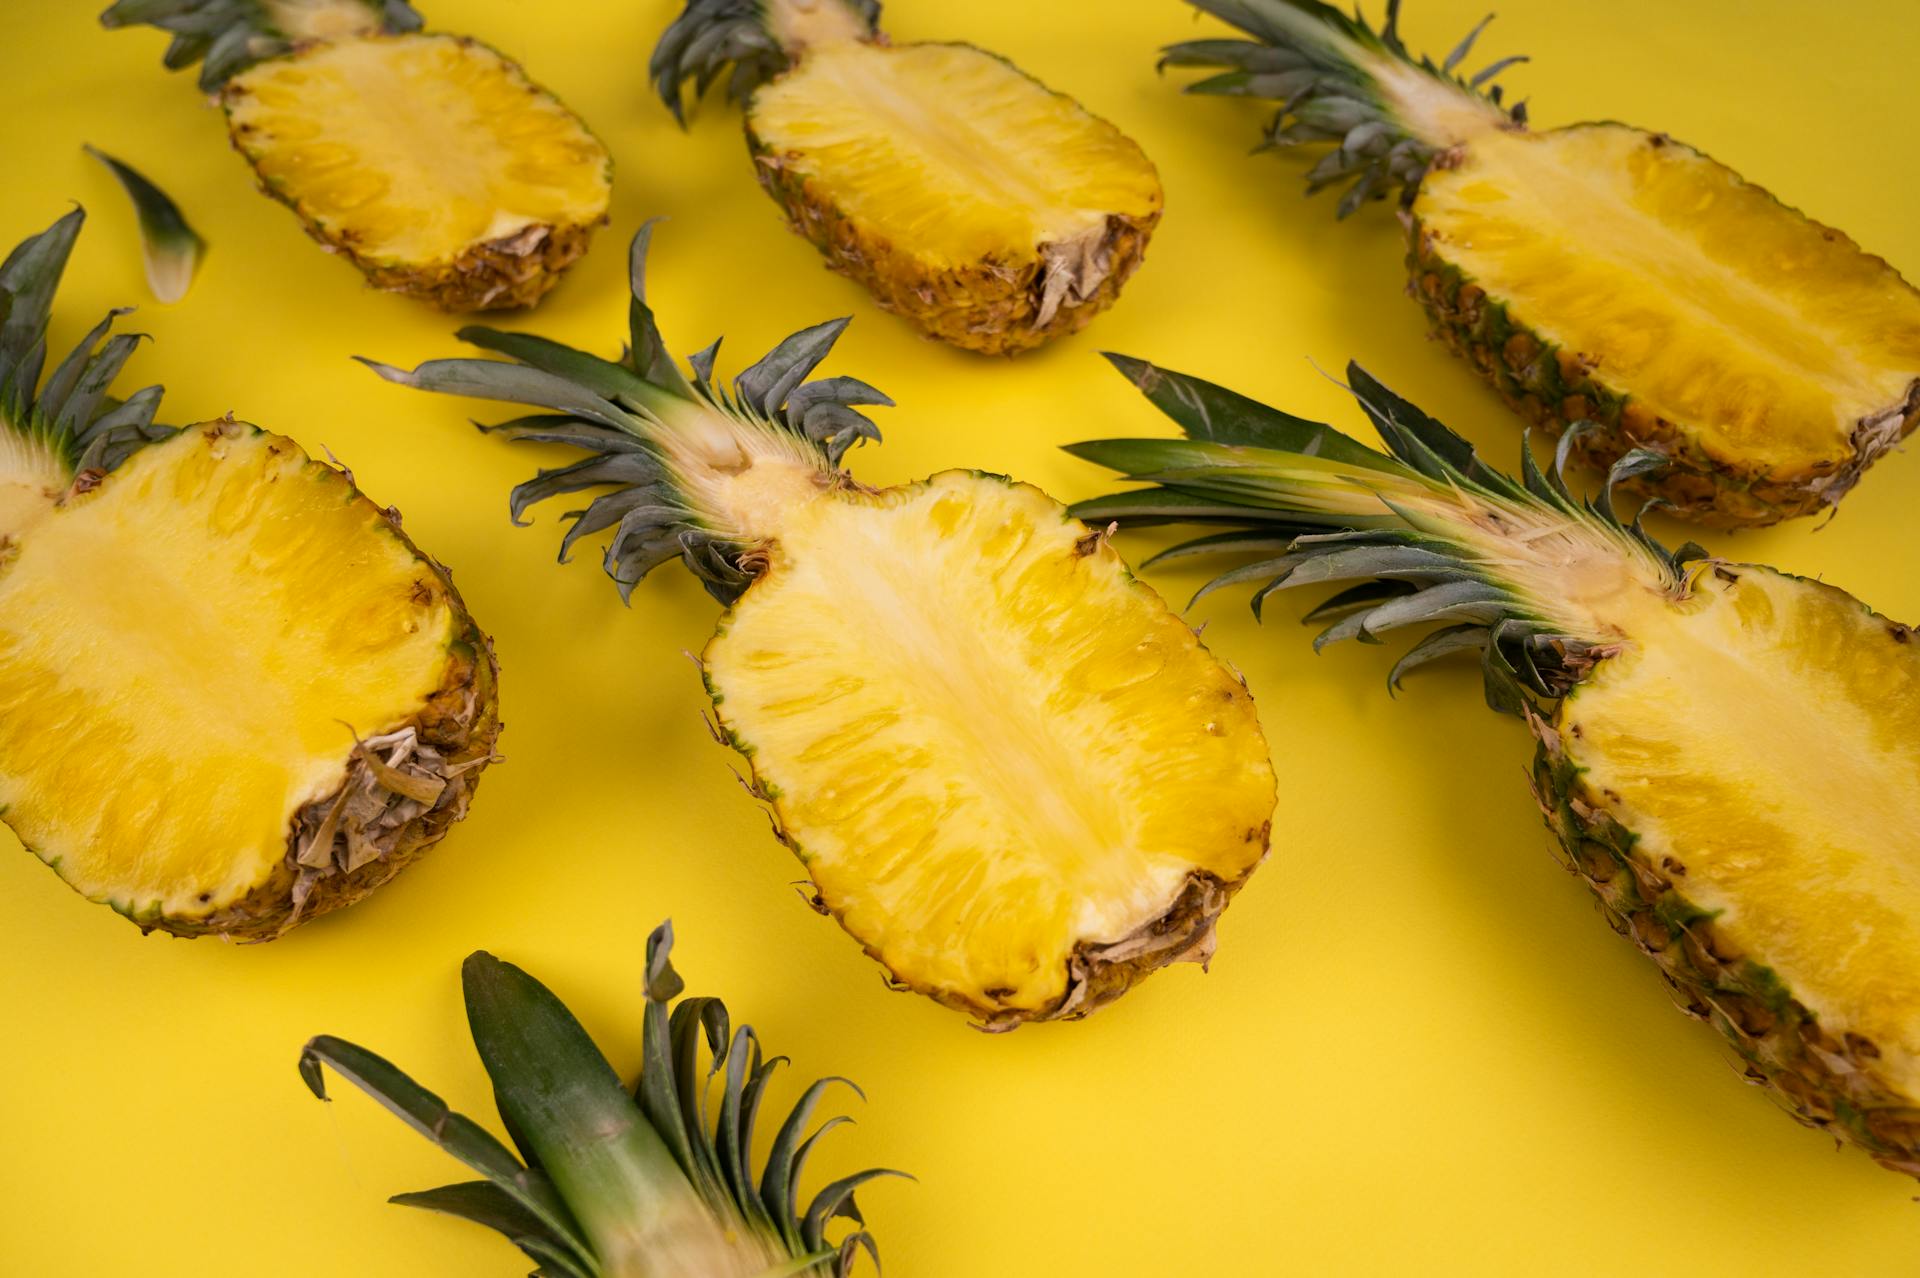 From above of fresh cut pineapples with sweet flesh and green leaves on yellow background